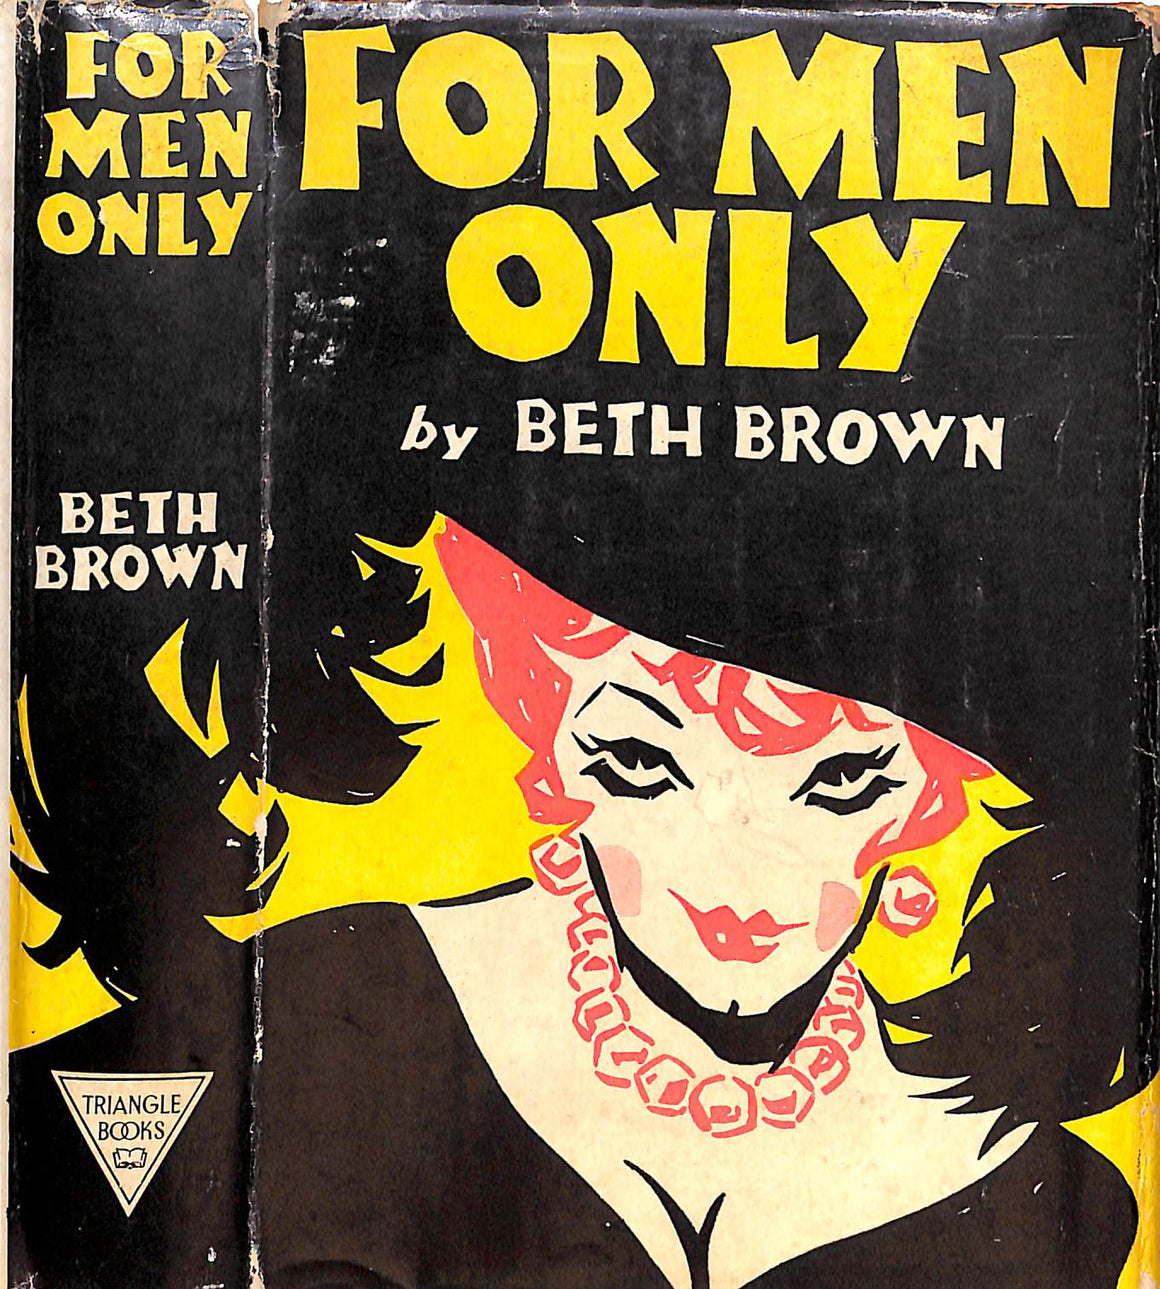 "For Men Only" 1941 BROWN, Beth